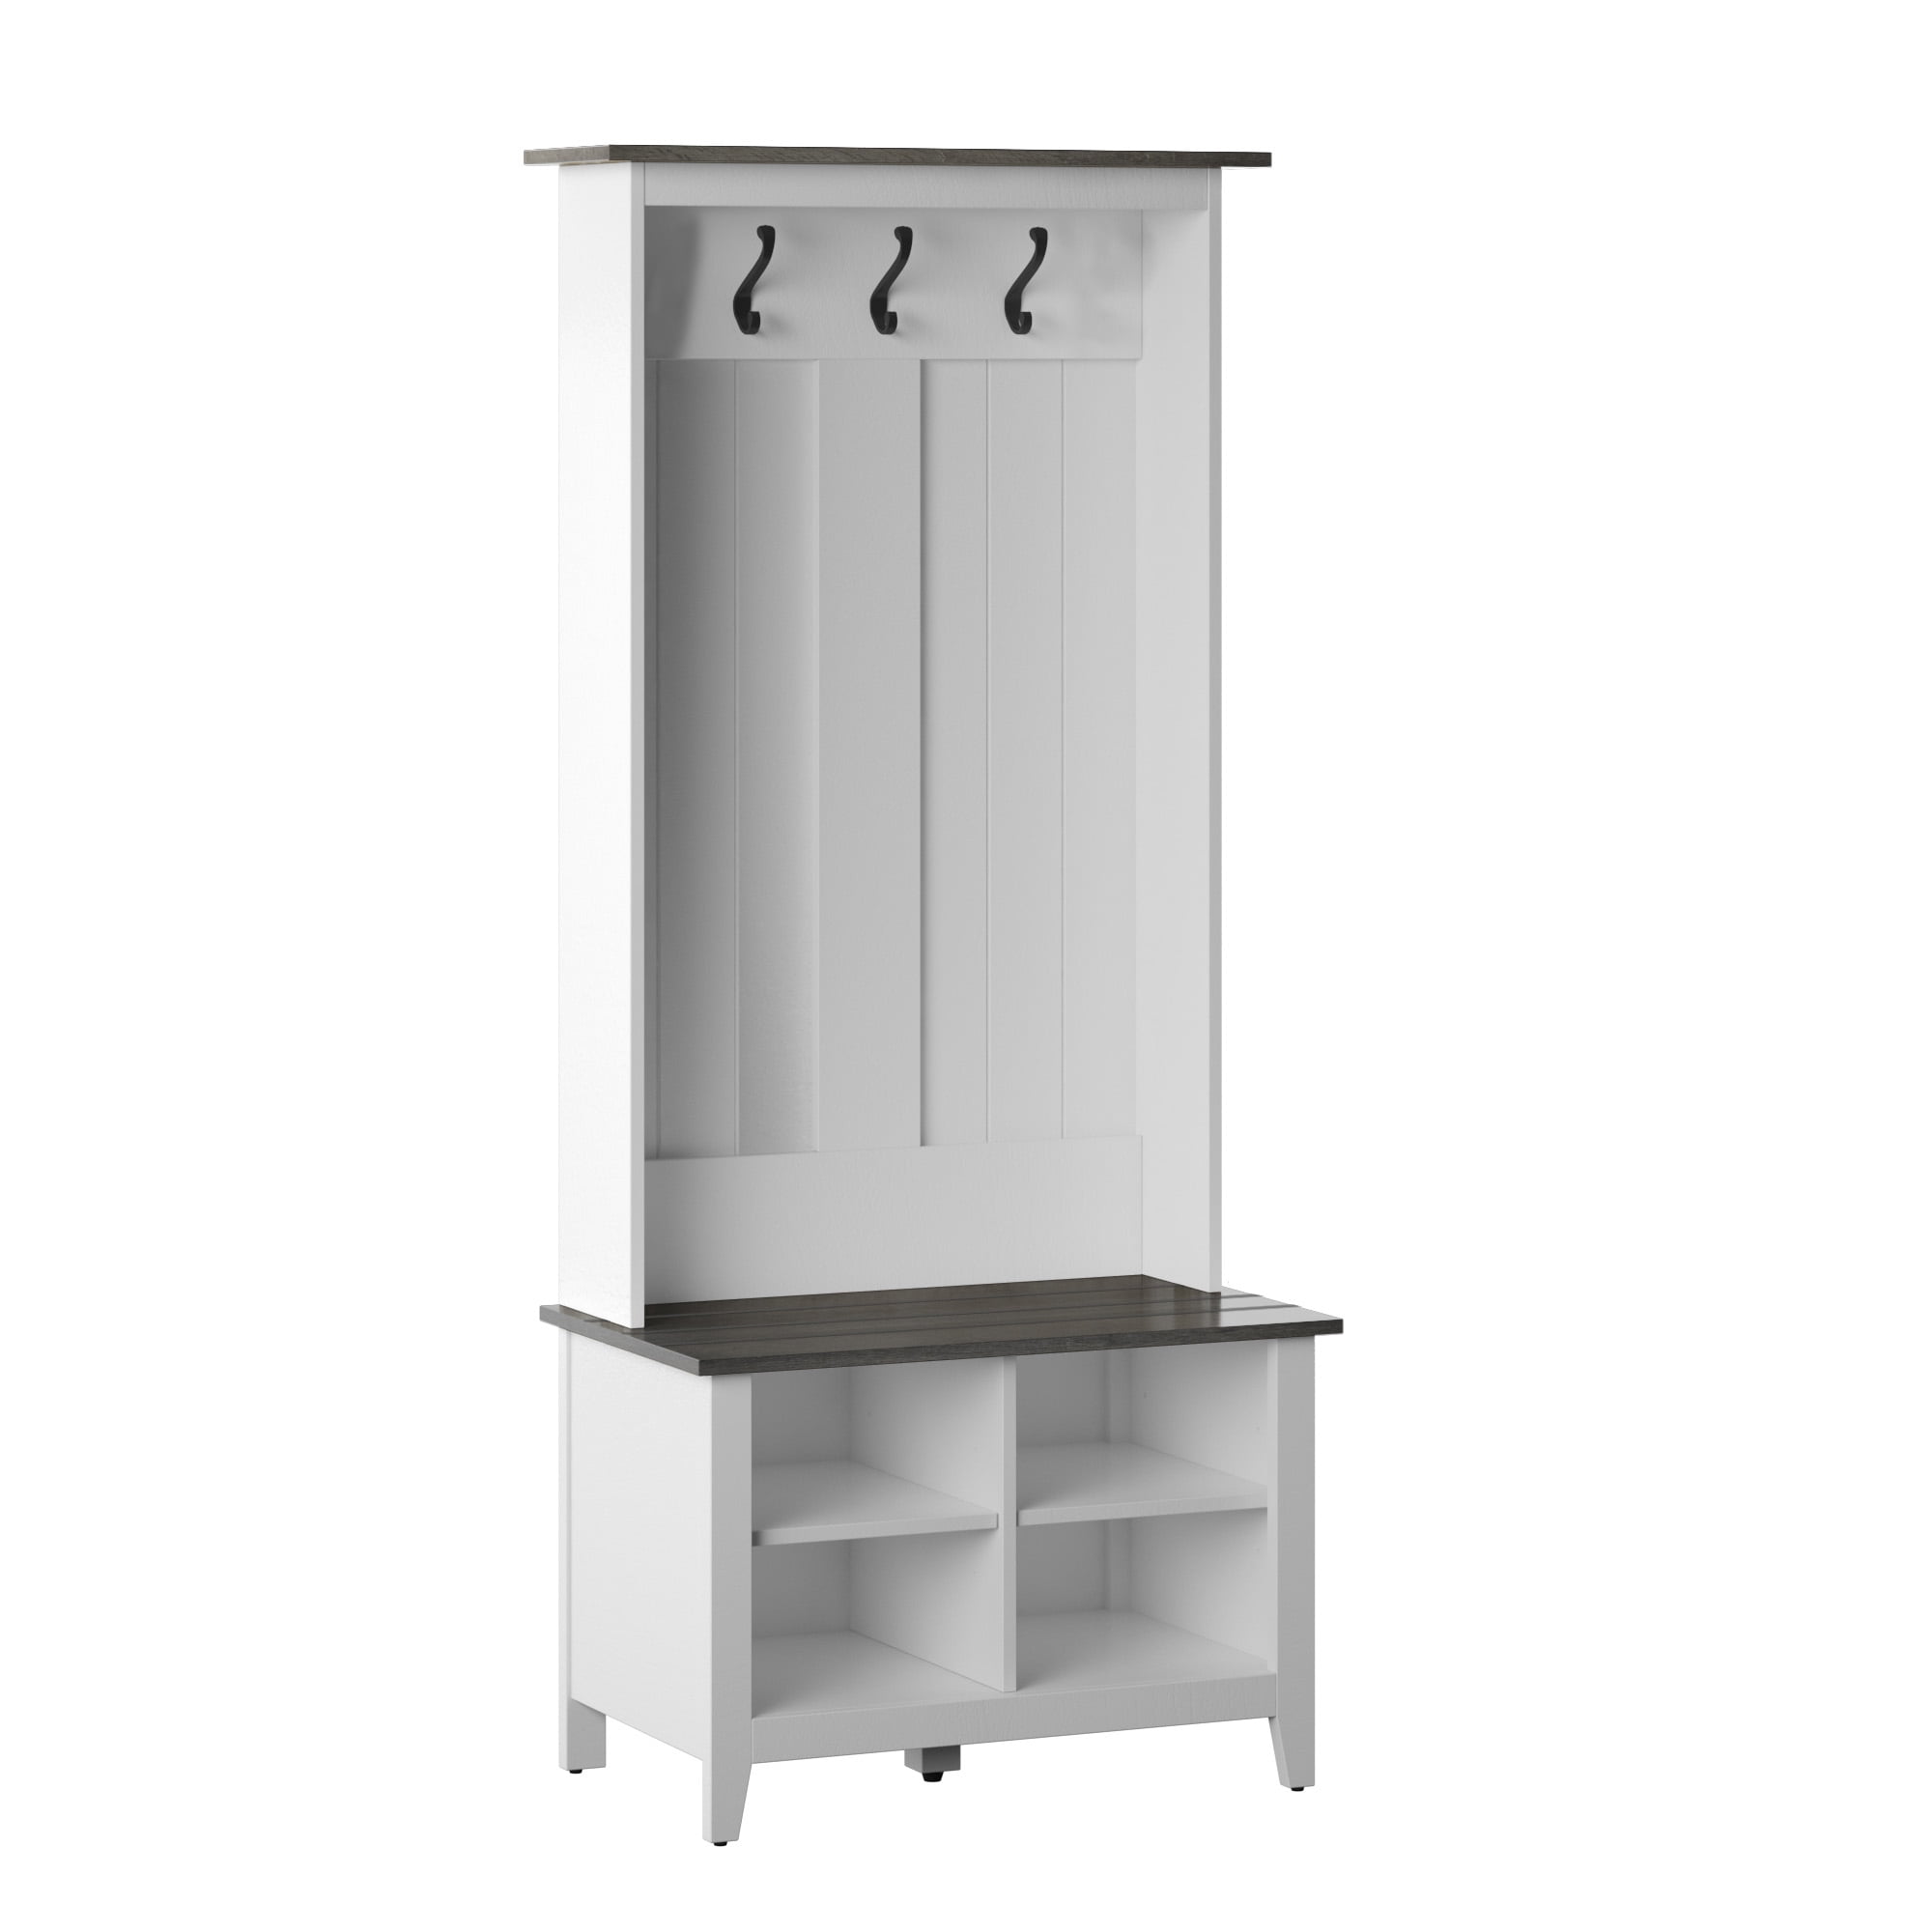 Twin Star Home Hall Tree with Storage Bench in White - Walmart.com